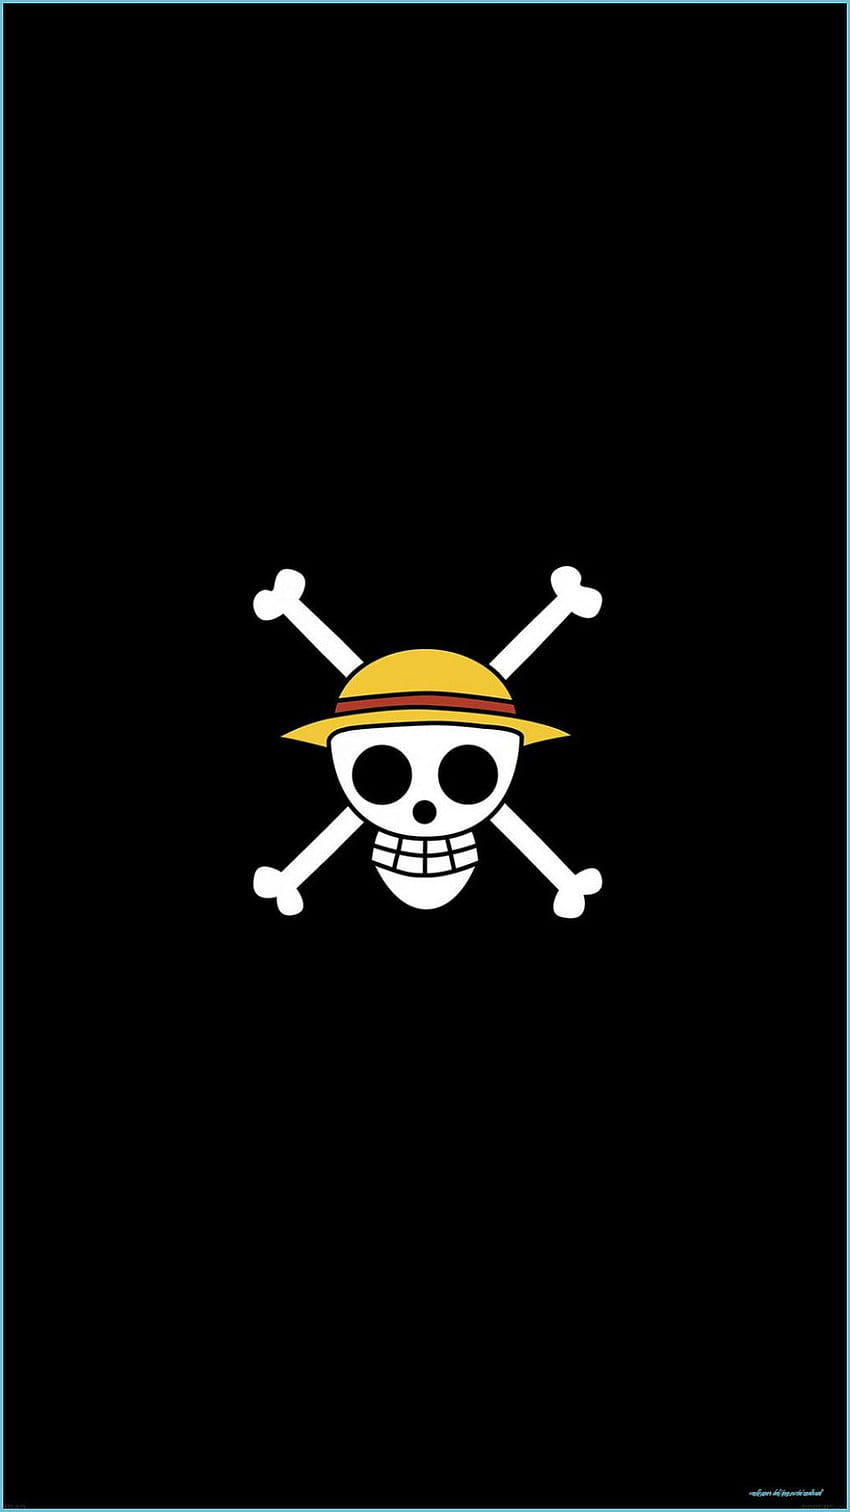 One Piece For Android Anime In 10 One – One - One Piece Android, Flag One Piece Anime HD phone wallpaper